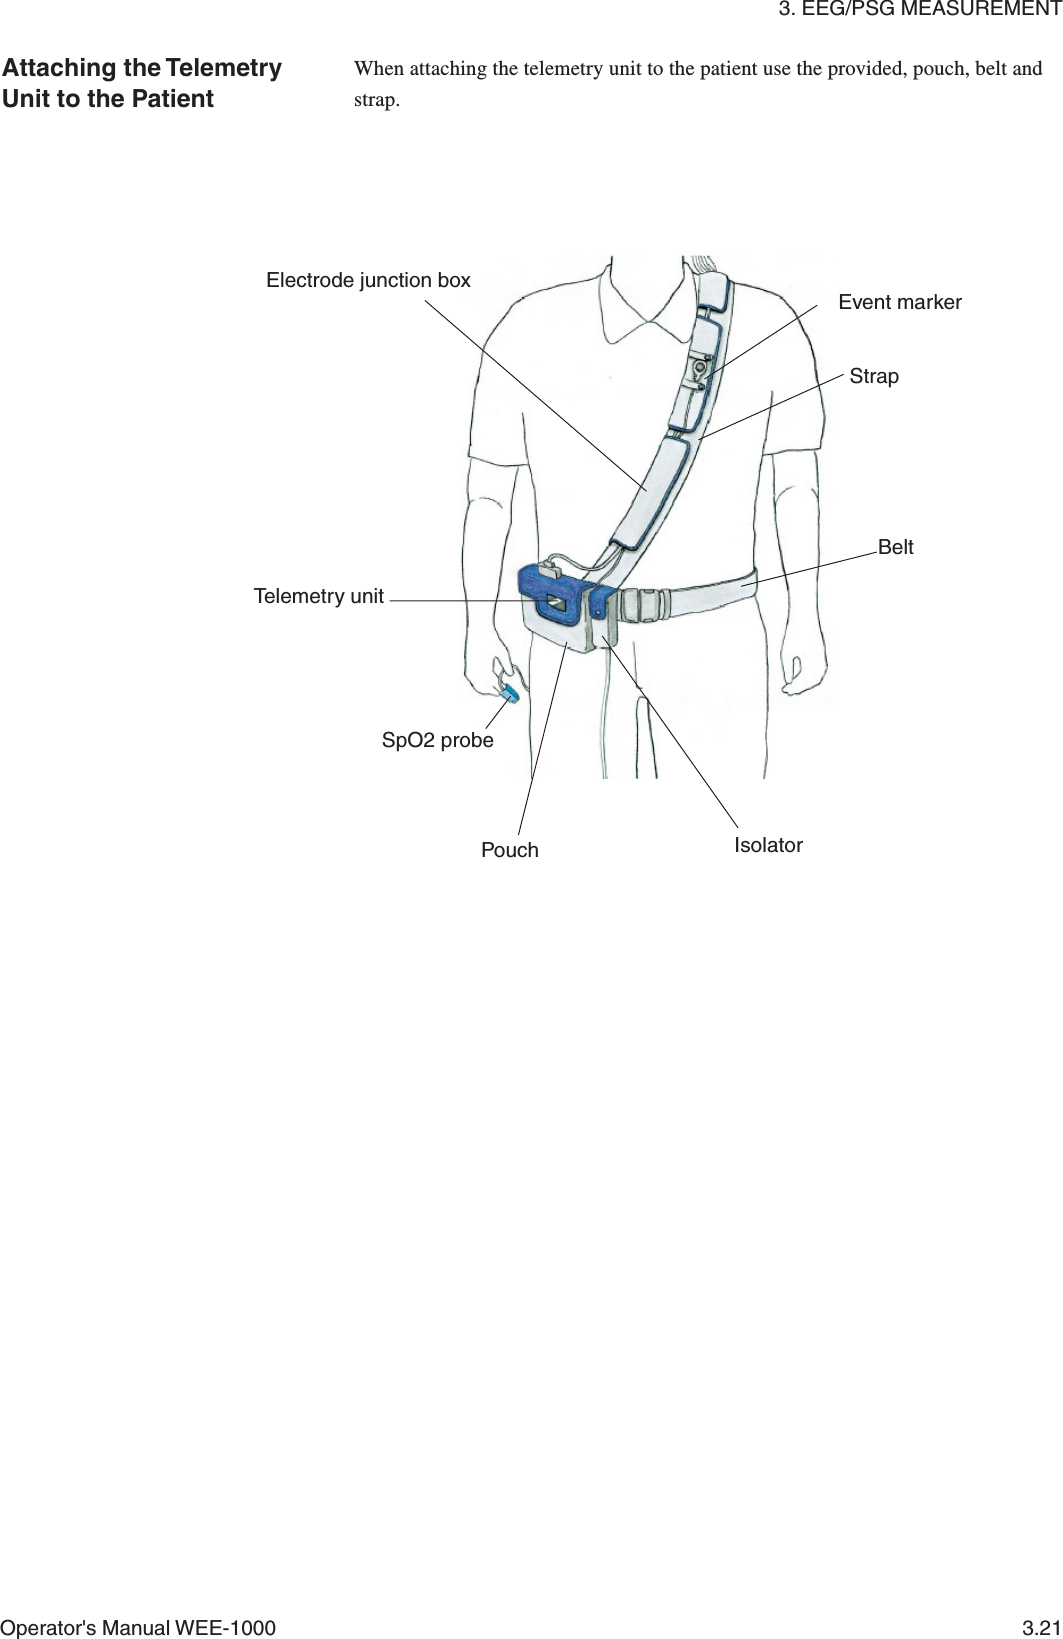 3. EEG/PSG MEASUREMENTOperator&apos;s Manual WEE-1000 3.21Attaching the TelemetryUnit to the PatientWhen attaching the telemetry unit to the patient use the provided, pouch, belt andstrap.Electrode junction boxEvent markerSpO2 probeTelemetry unitStrapIsolatorPouchBelt